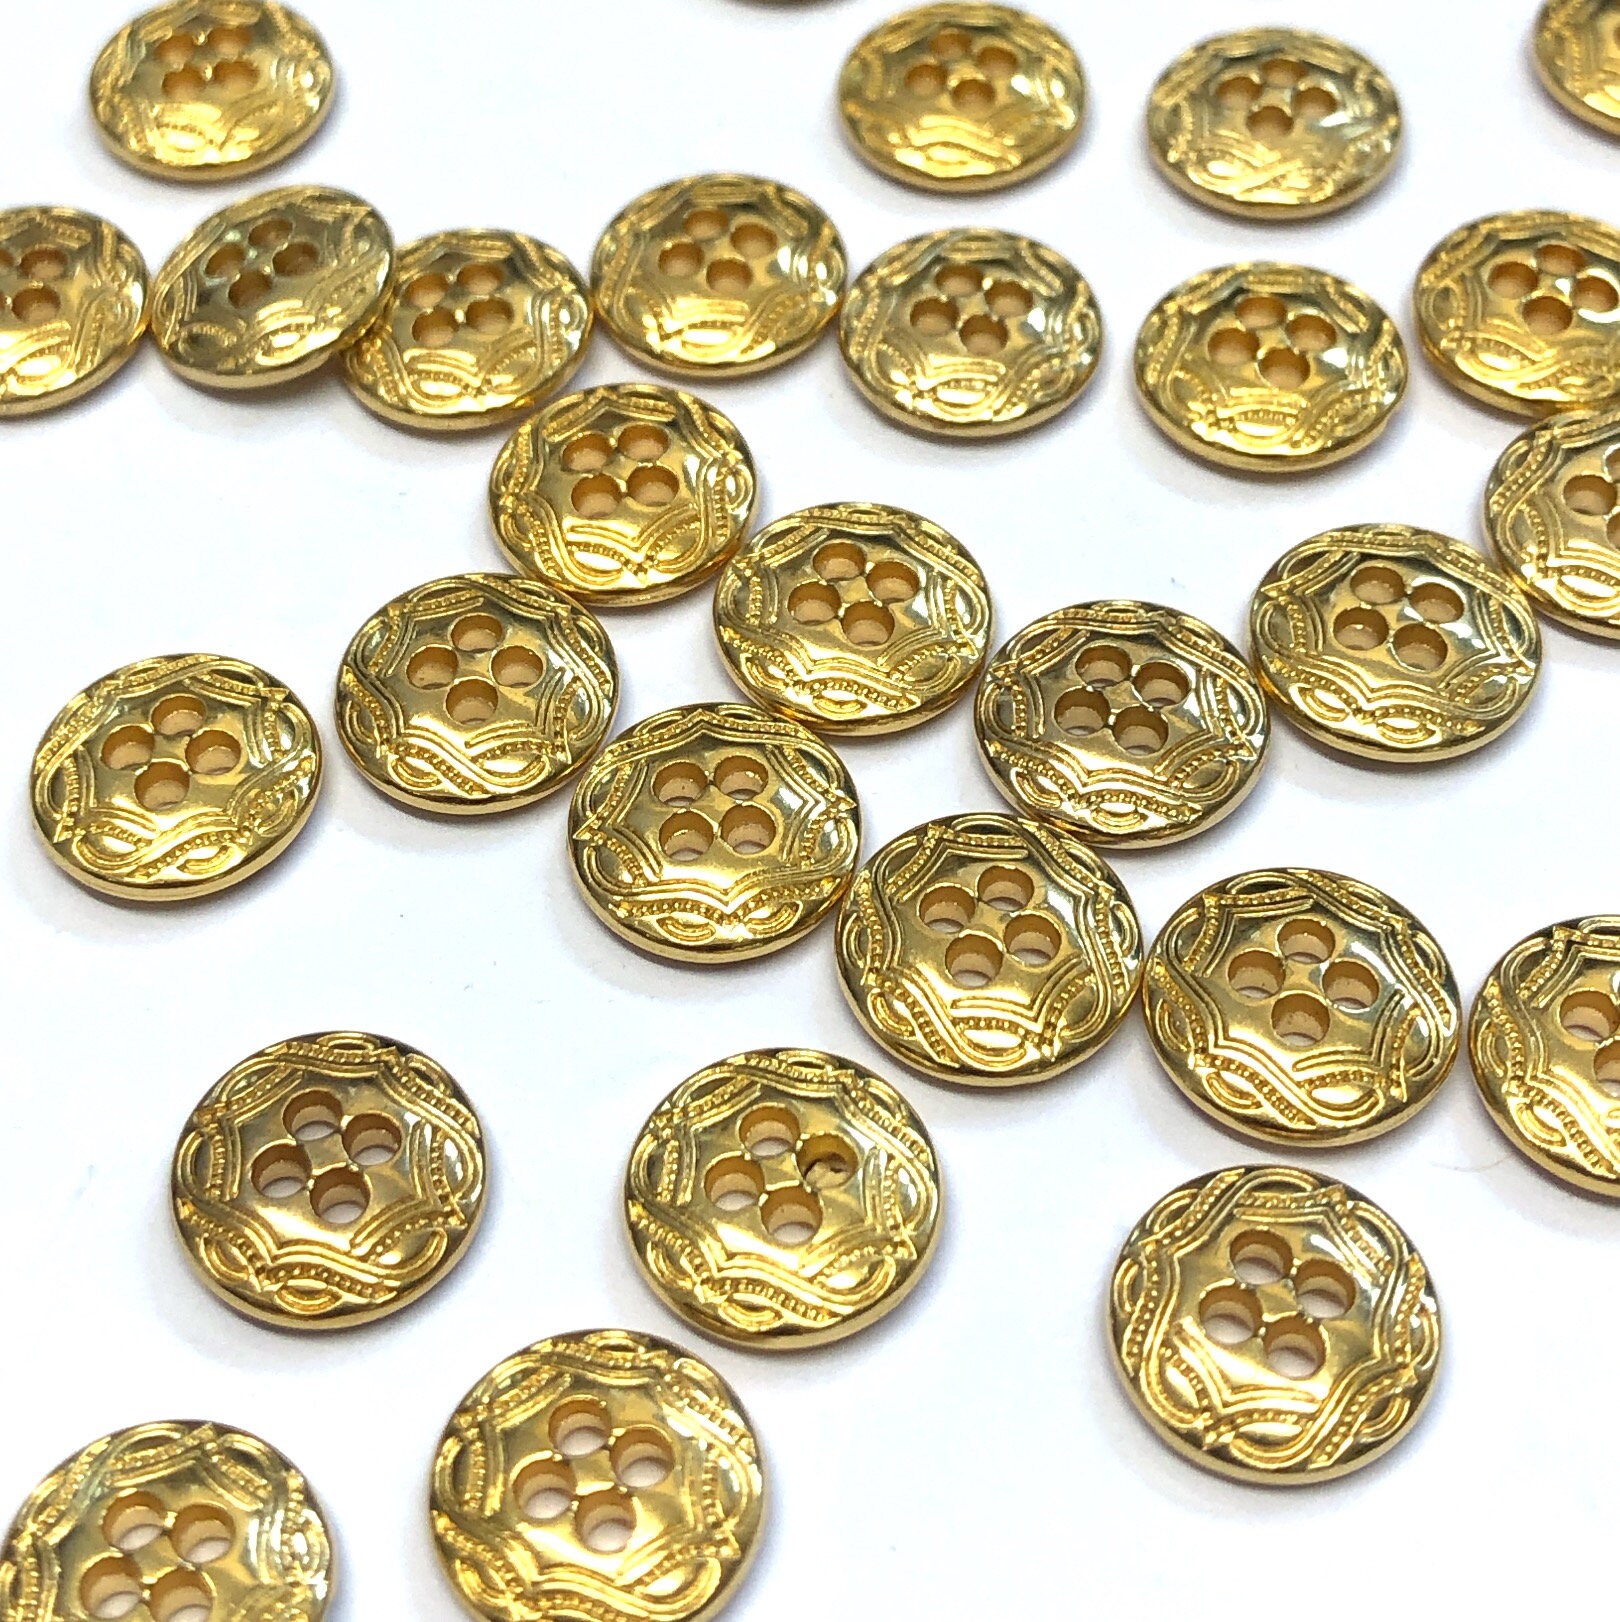 Golden Color Metal Shank Buttons, Gold Color, Striped Pattern, Retro  Vintage Style, for Sewing Sweater Blazer Jacket, 15mm, 0.6inch, Round -   Denmark